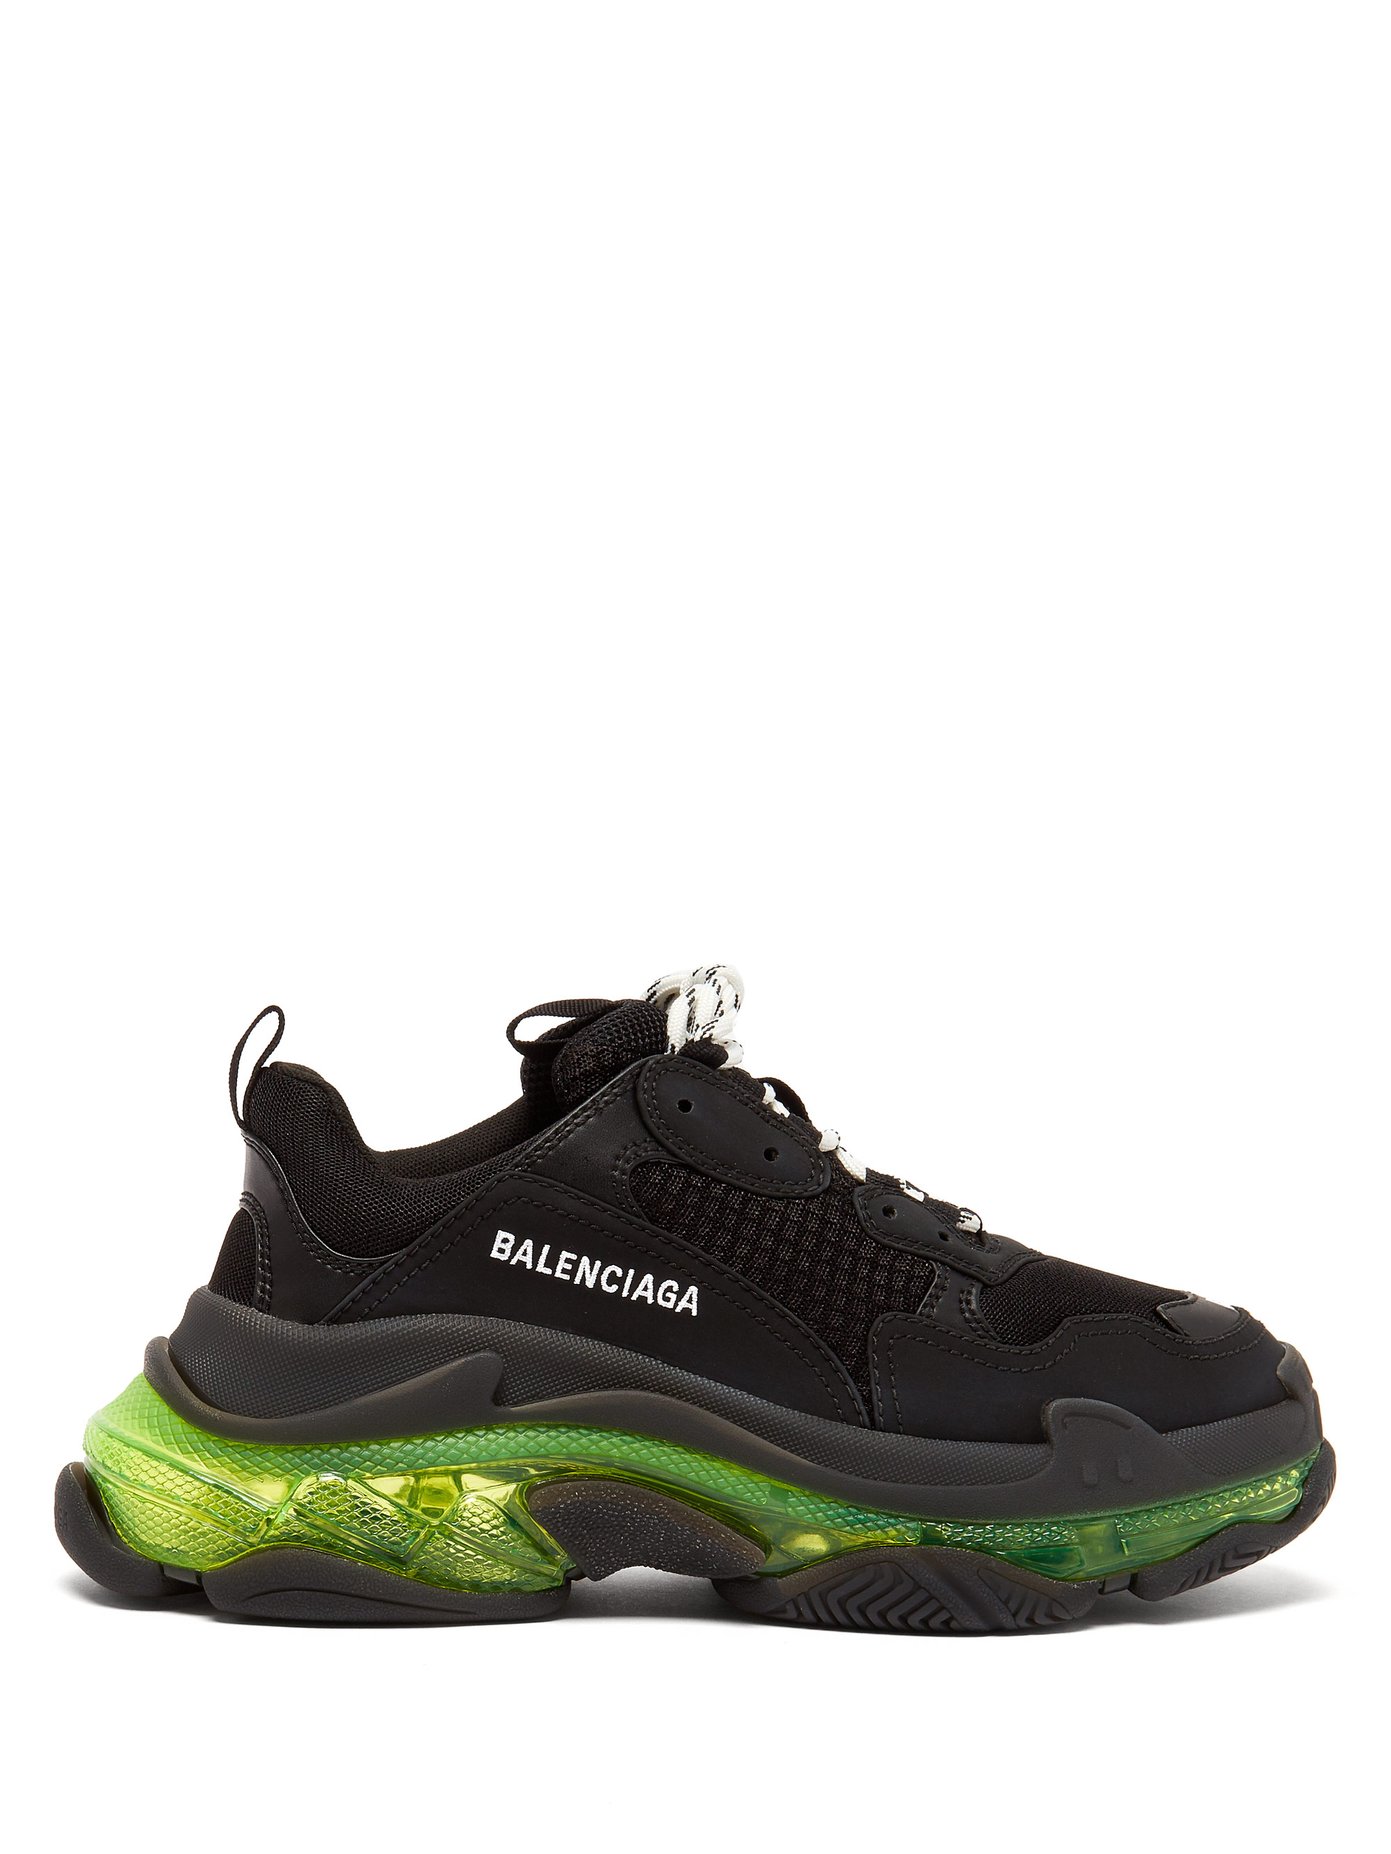 Buy Your size Balenciaga Triple S Trainers Jaune Fluo